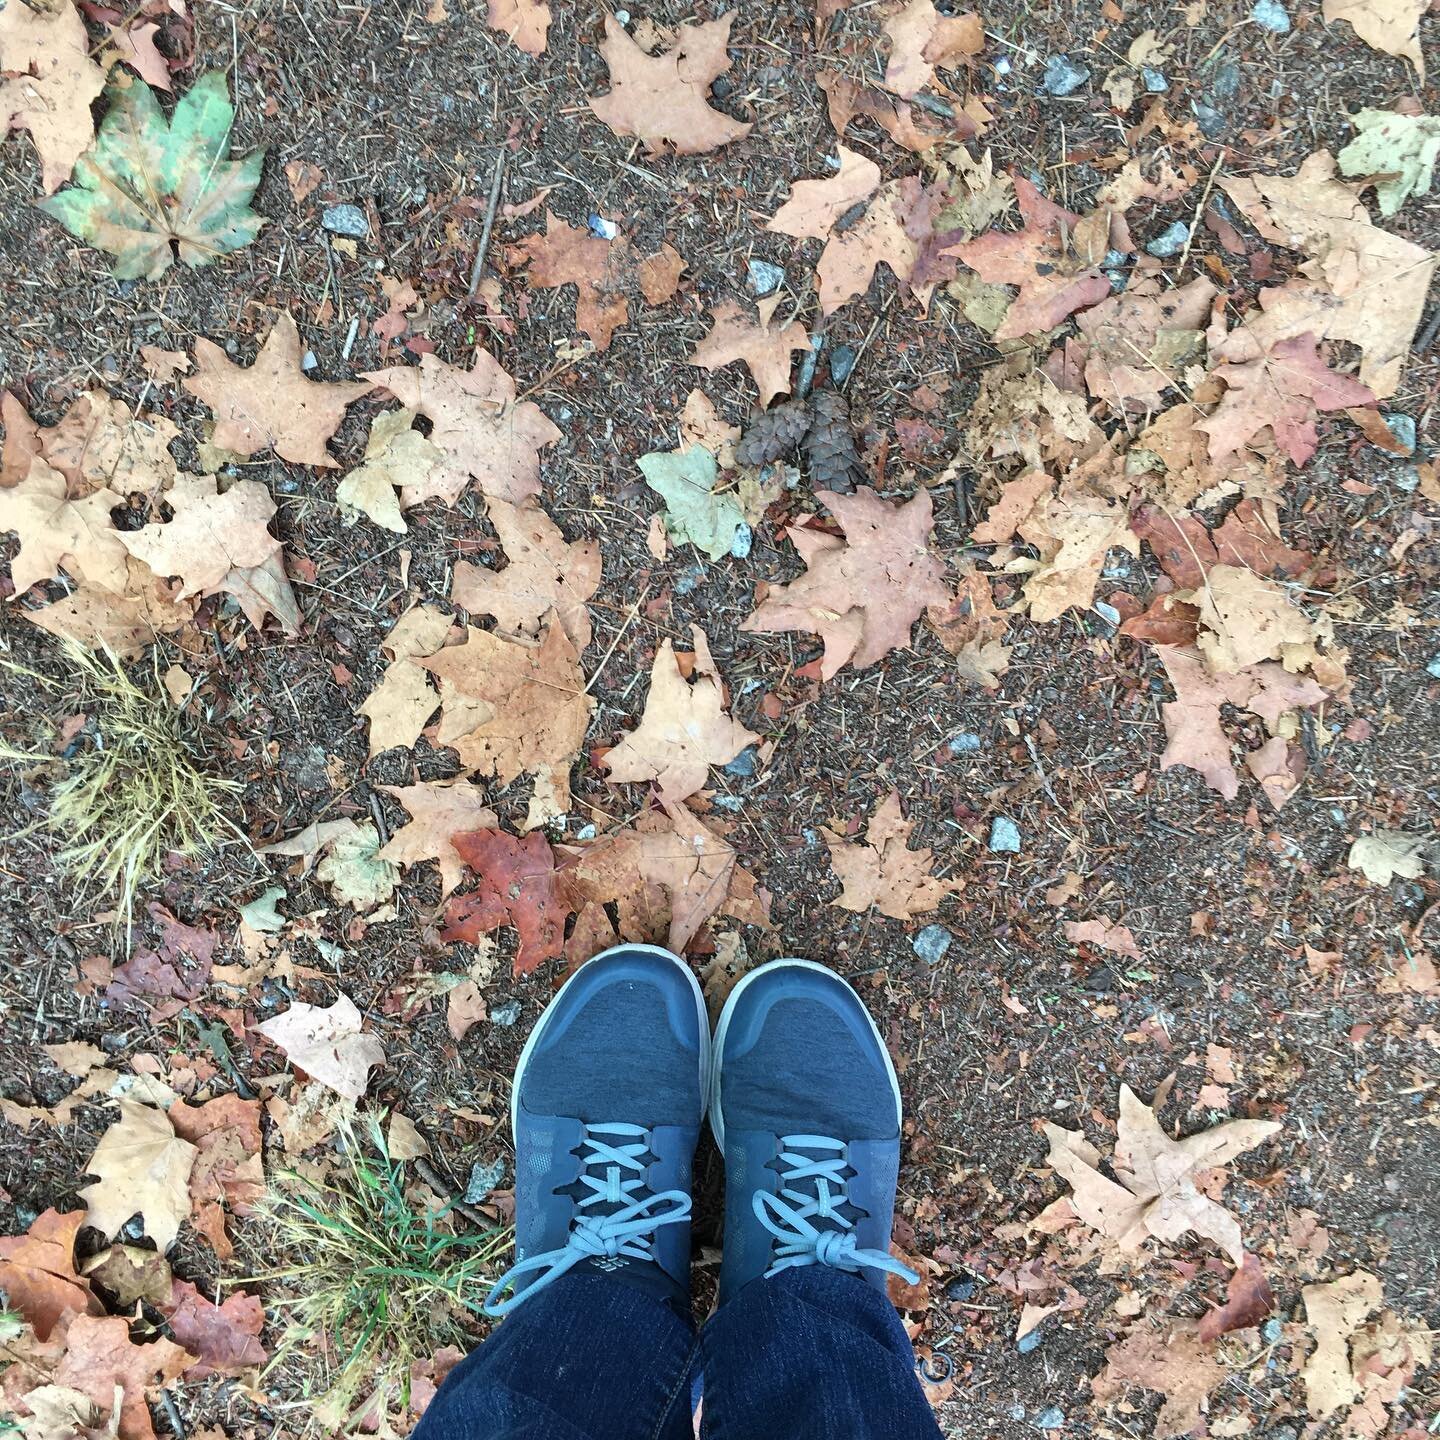 Enjoying fall

[shoes and leaves]

#vancouver #bc #fall #autumn